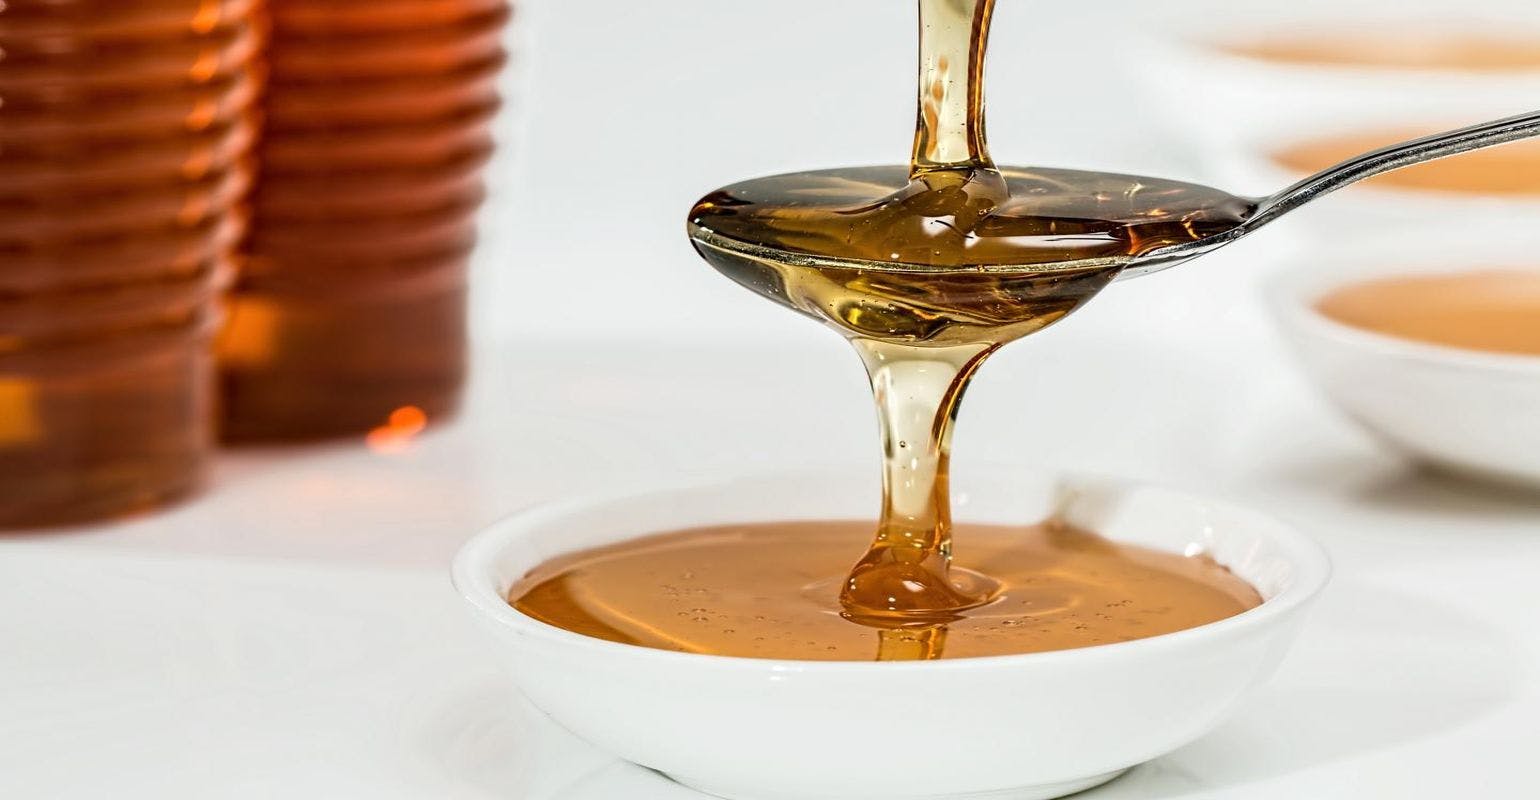 Manuka Honey May Kill Drug-Resistant Bacteria Found in Cystic Fibrosis Infections